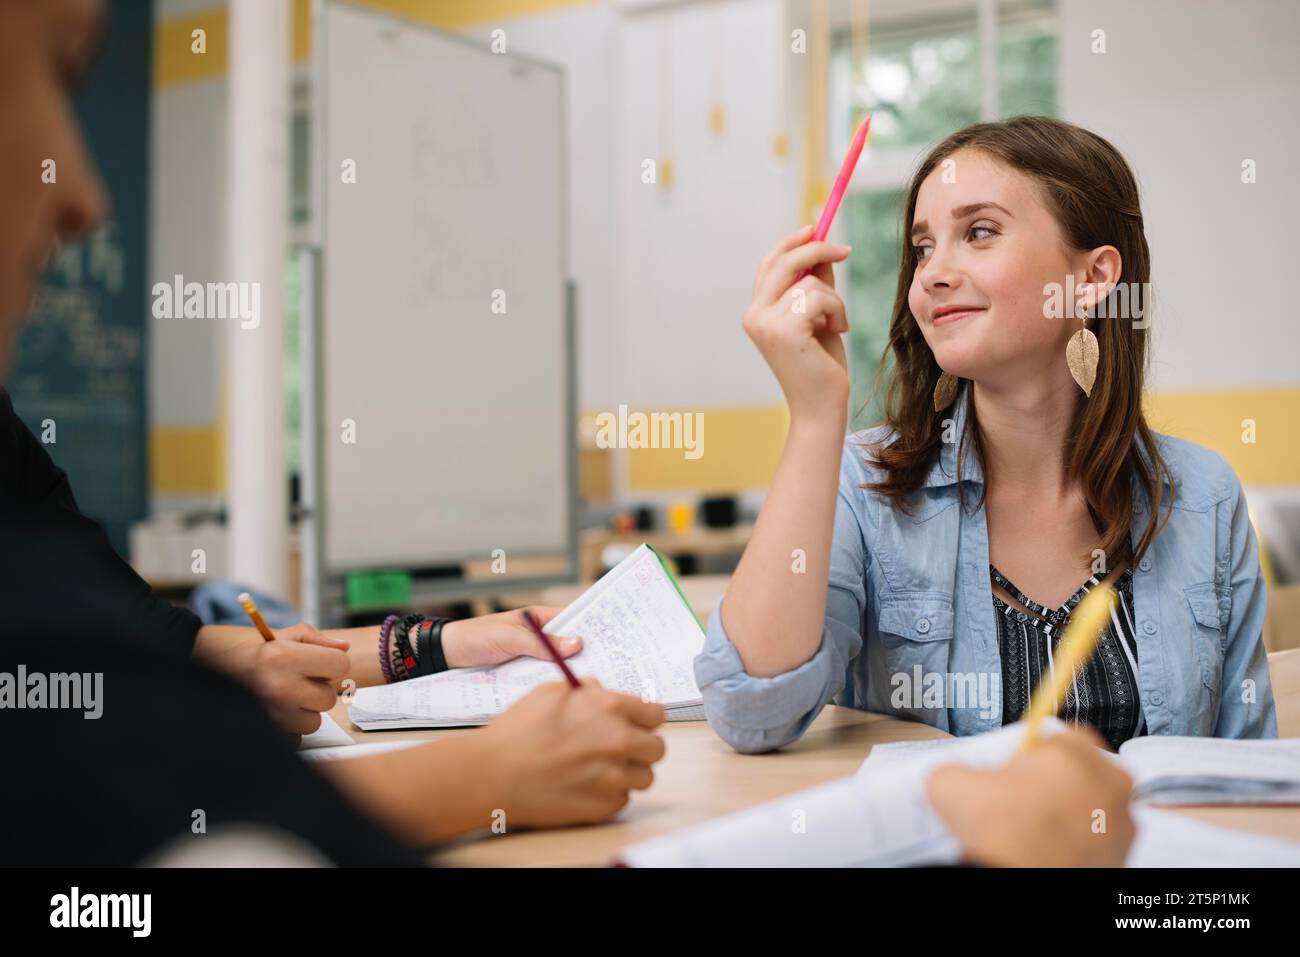 Teen girl pointing up Stock Photo